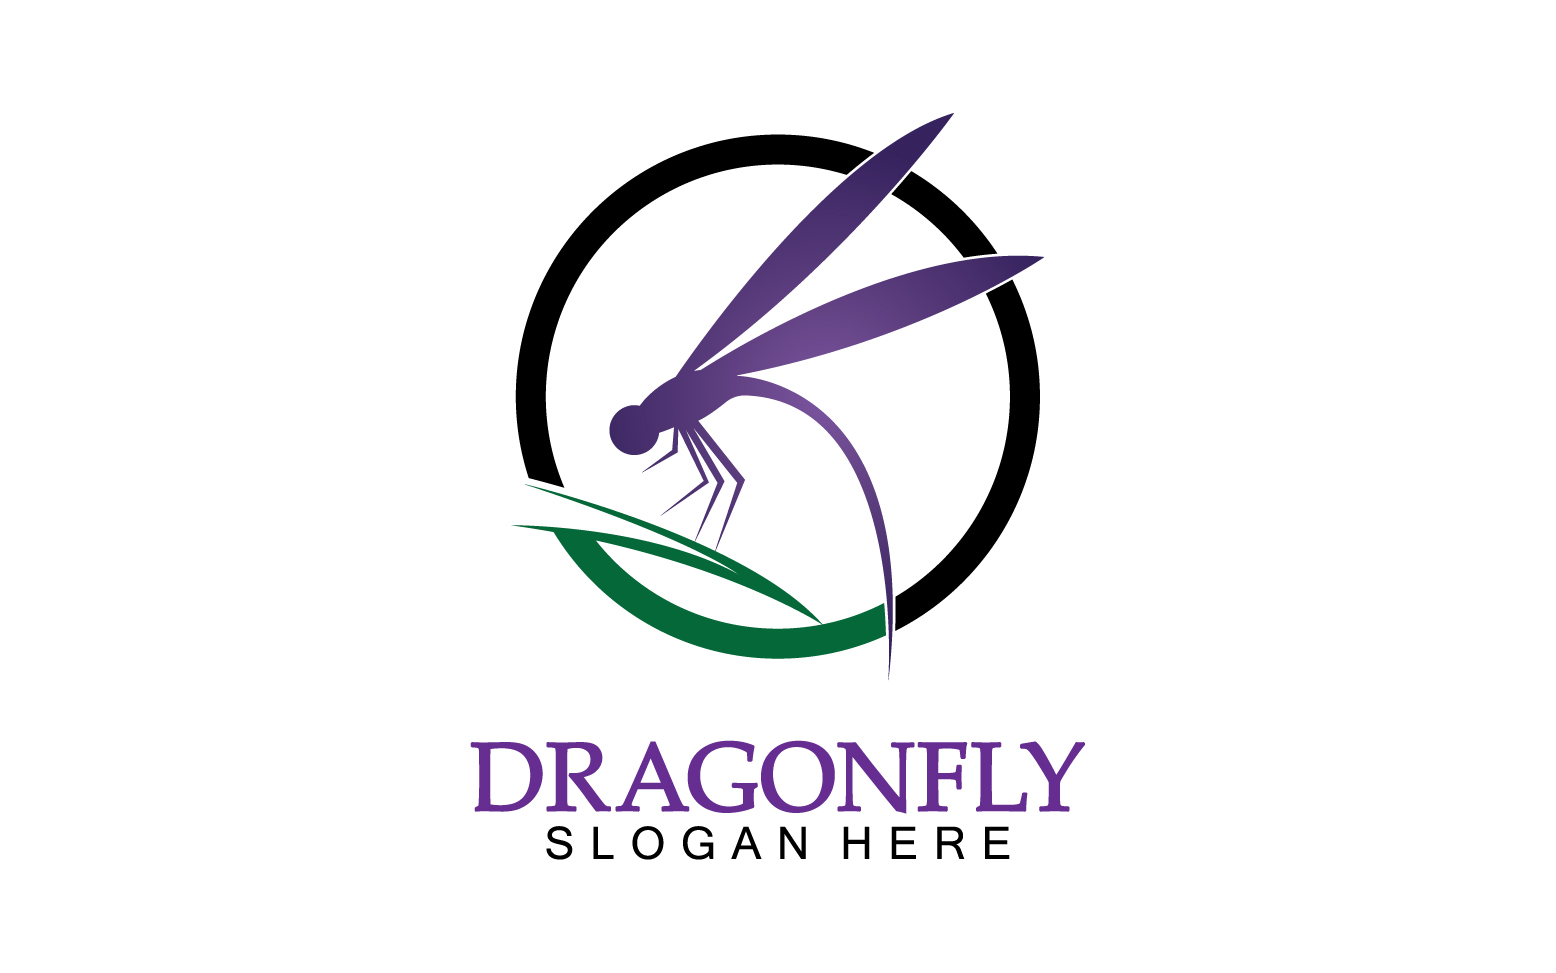 Dragonfly silhouette icon flat vector illustration logo clipart v28